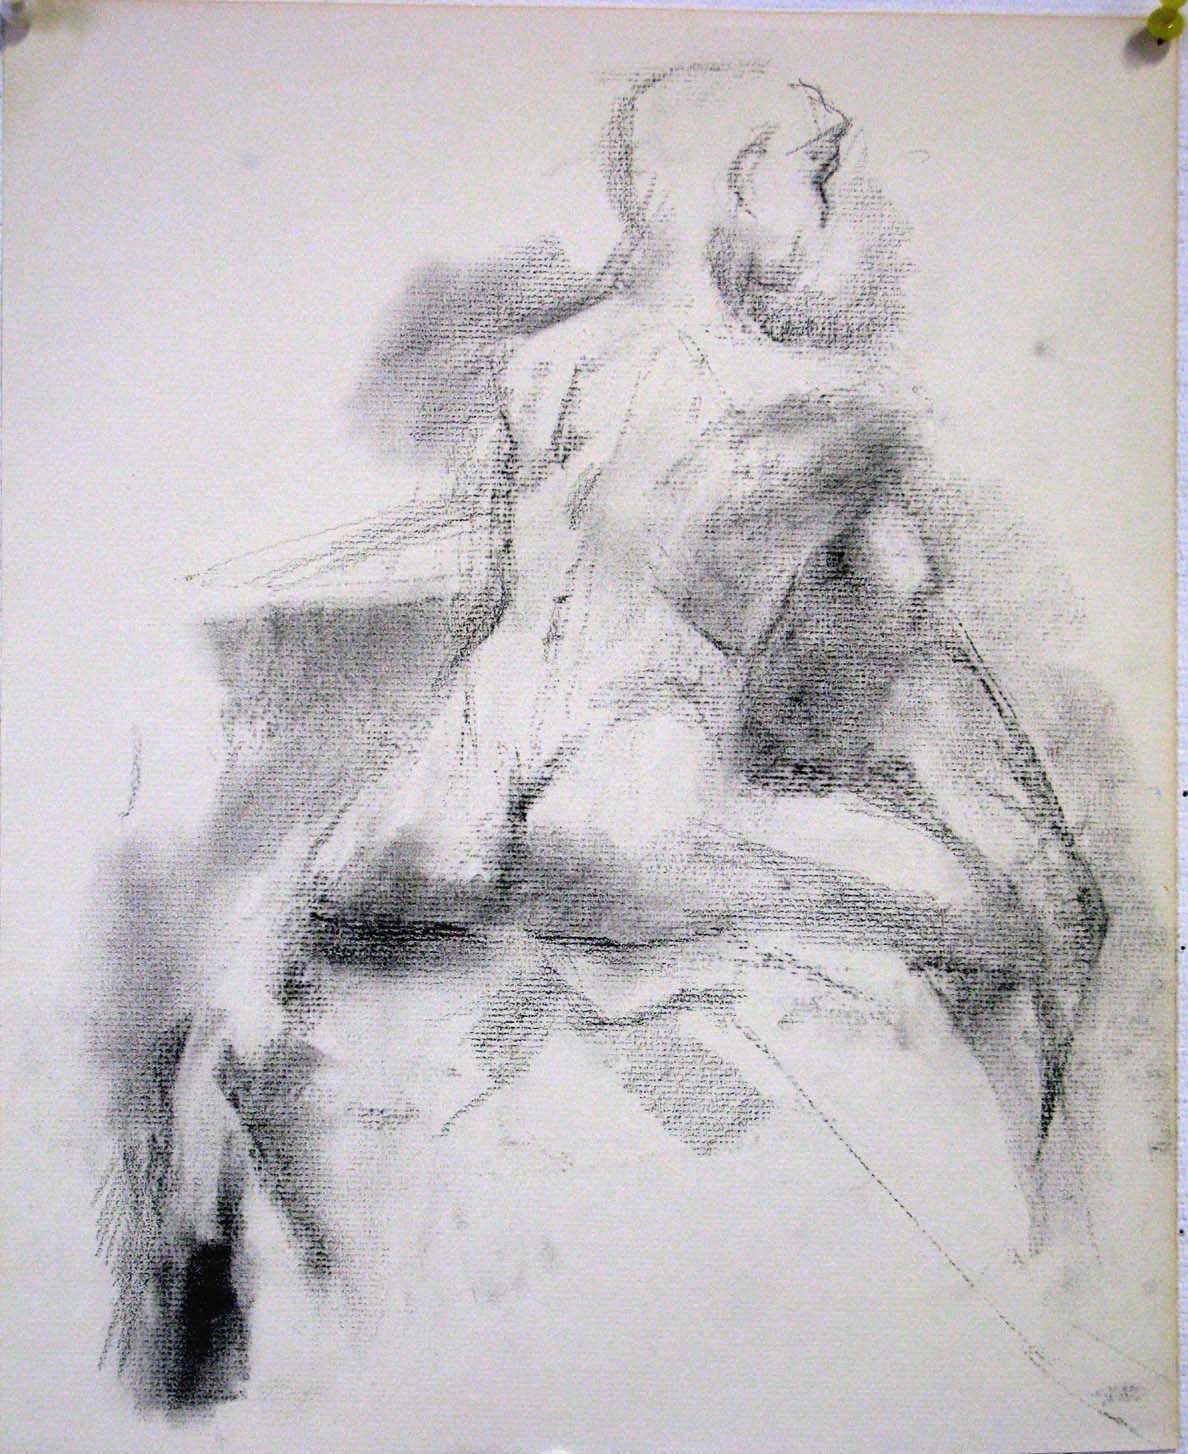 Seated Female Nude, Back, 15 x 12 inches, charcoal.